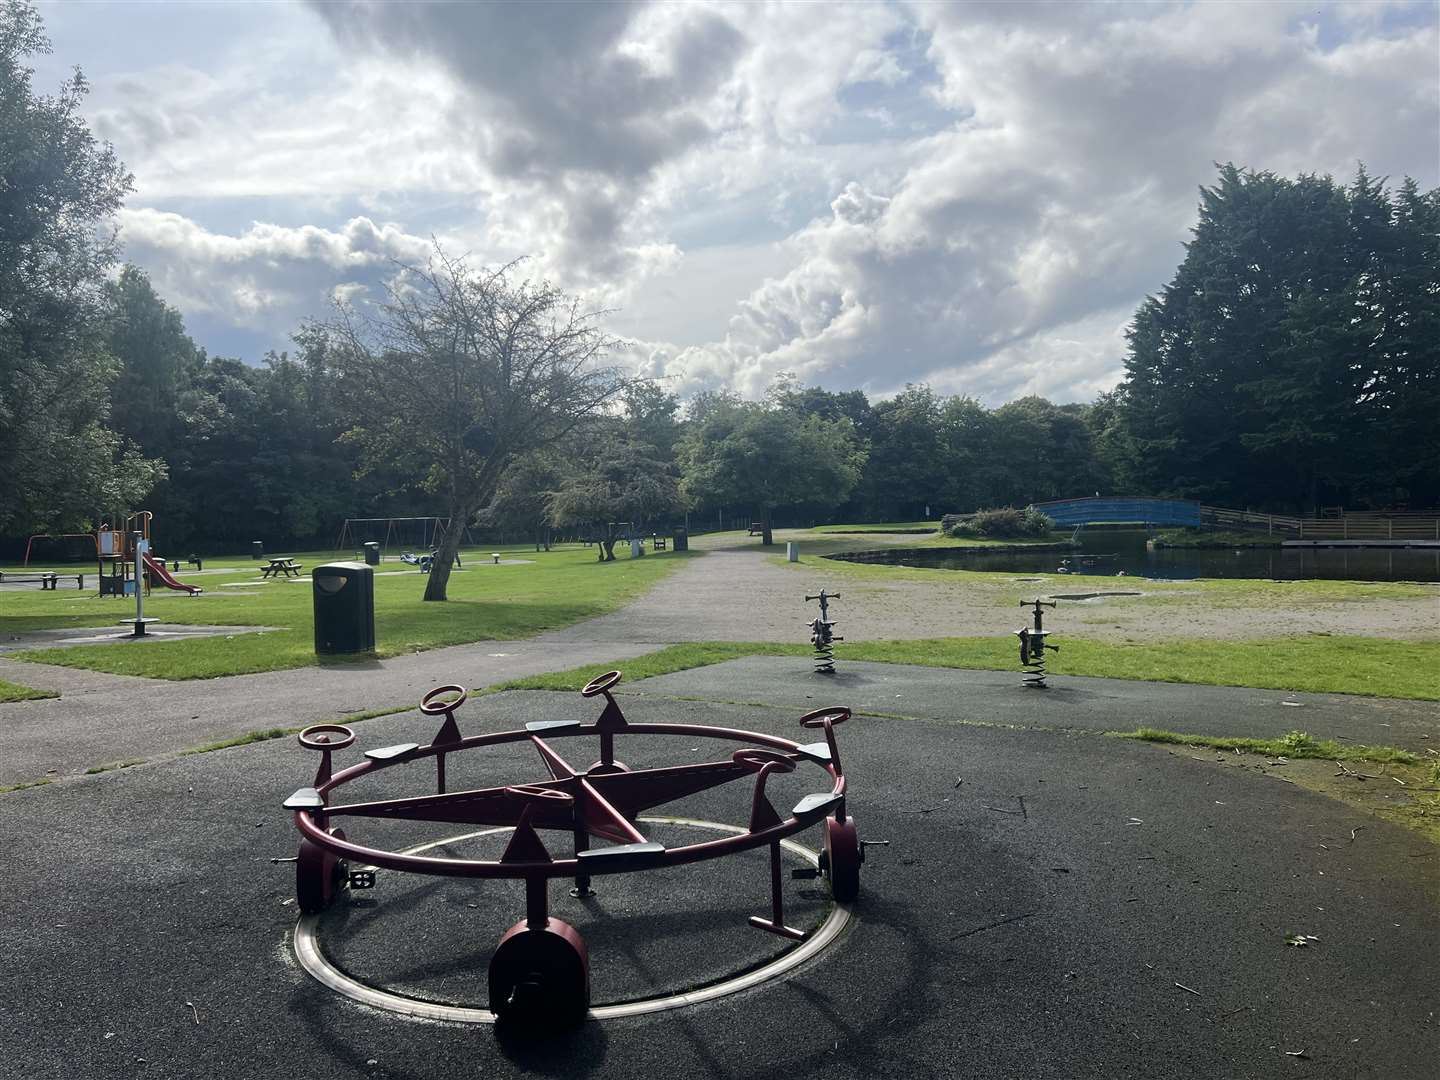 Play equipment at Whin Park is in line for replacement.